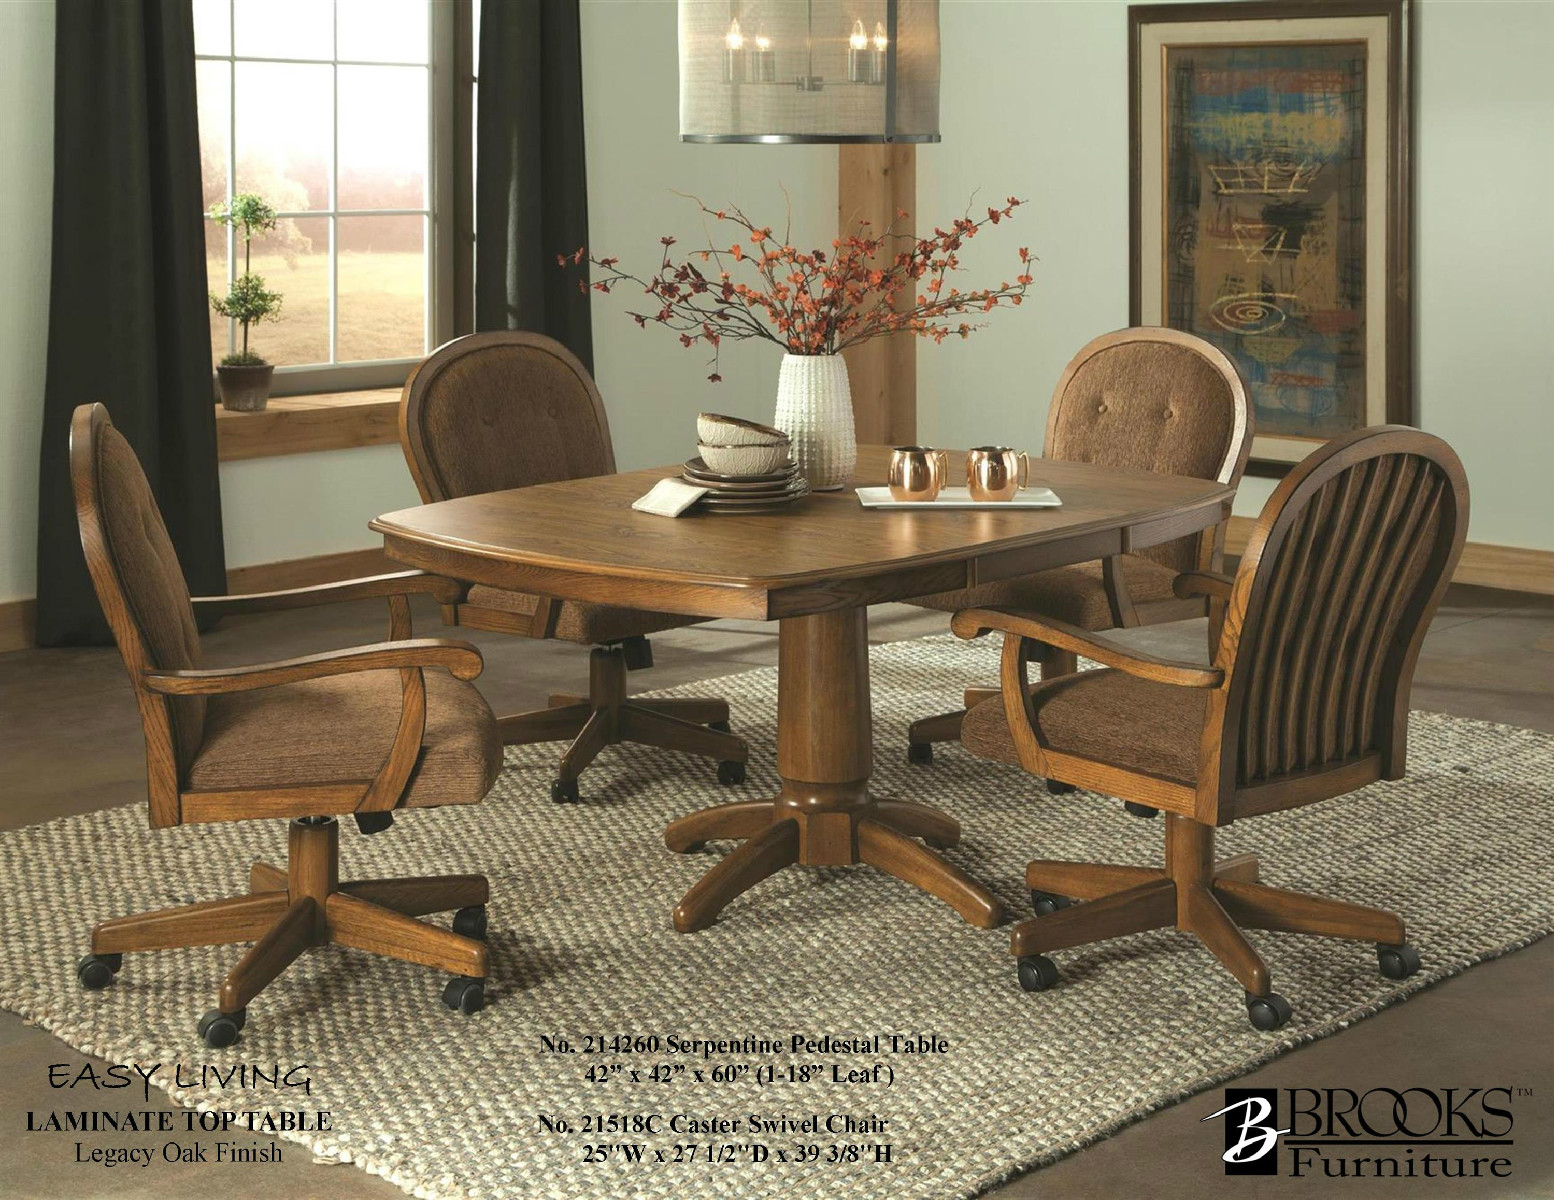 21426 Brooks Laminate Table & 21518C Roller Chairs